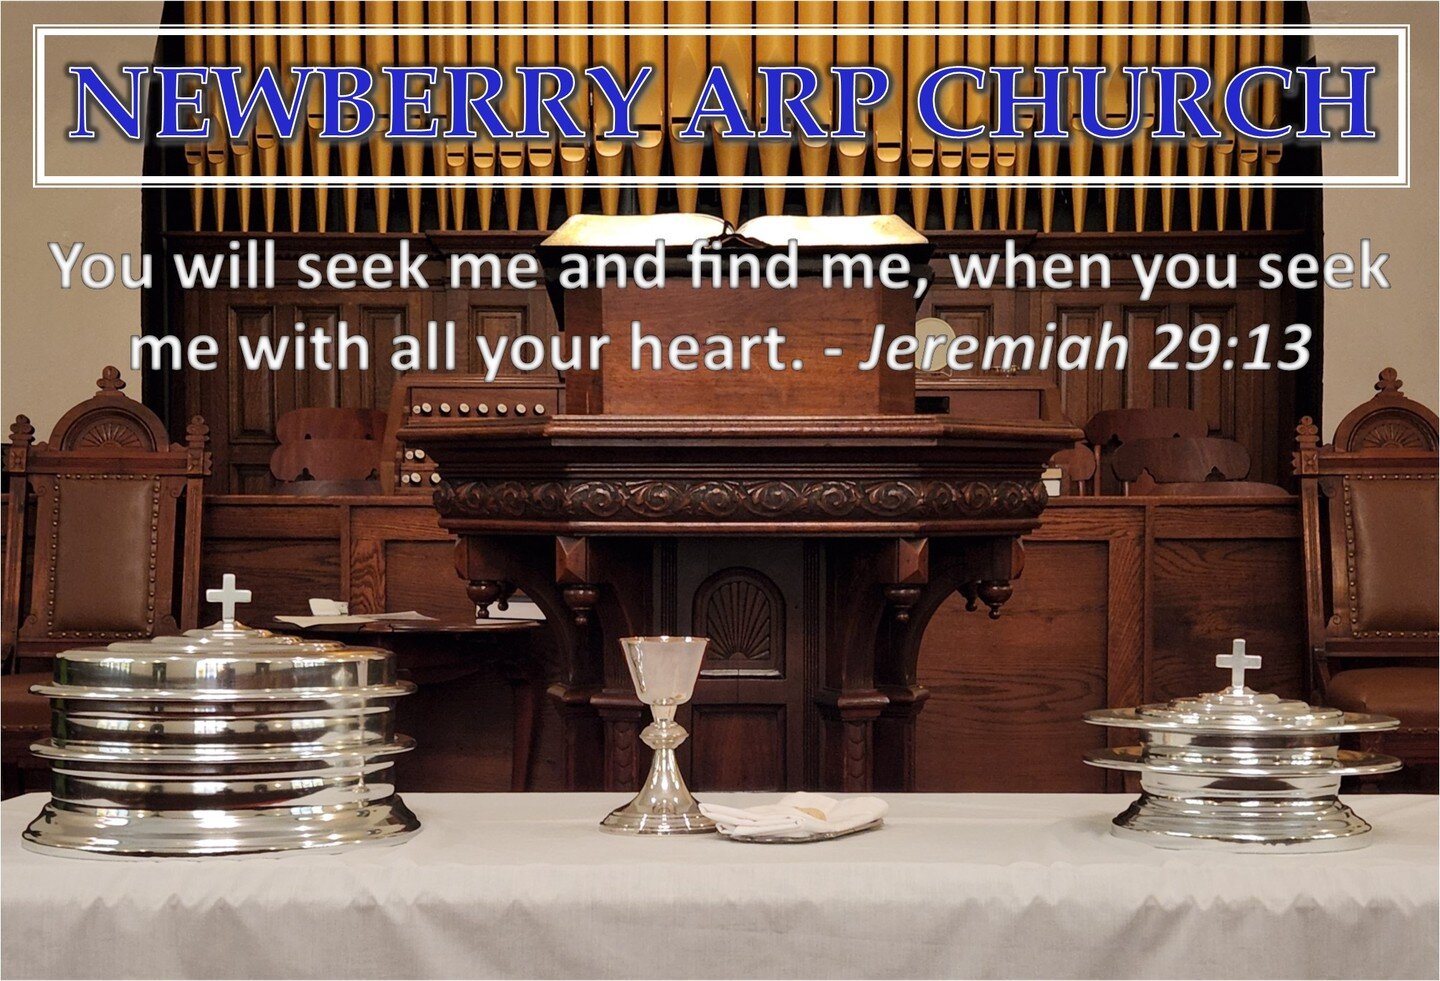 Join us for our Lord's Day corporate worship, 9/4/22, at 10:55 AM, on the corner of Main and Calhoun Streets as we nourish our souls on the Word and Sacrament! 
This Sunday&rsquo;s bulletin is available at http://www.newberryarp.org/worship-this-sund